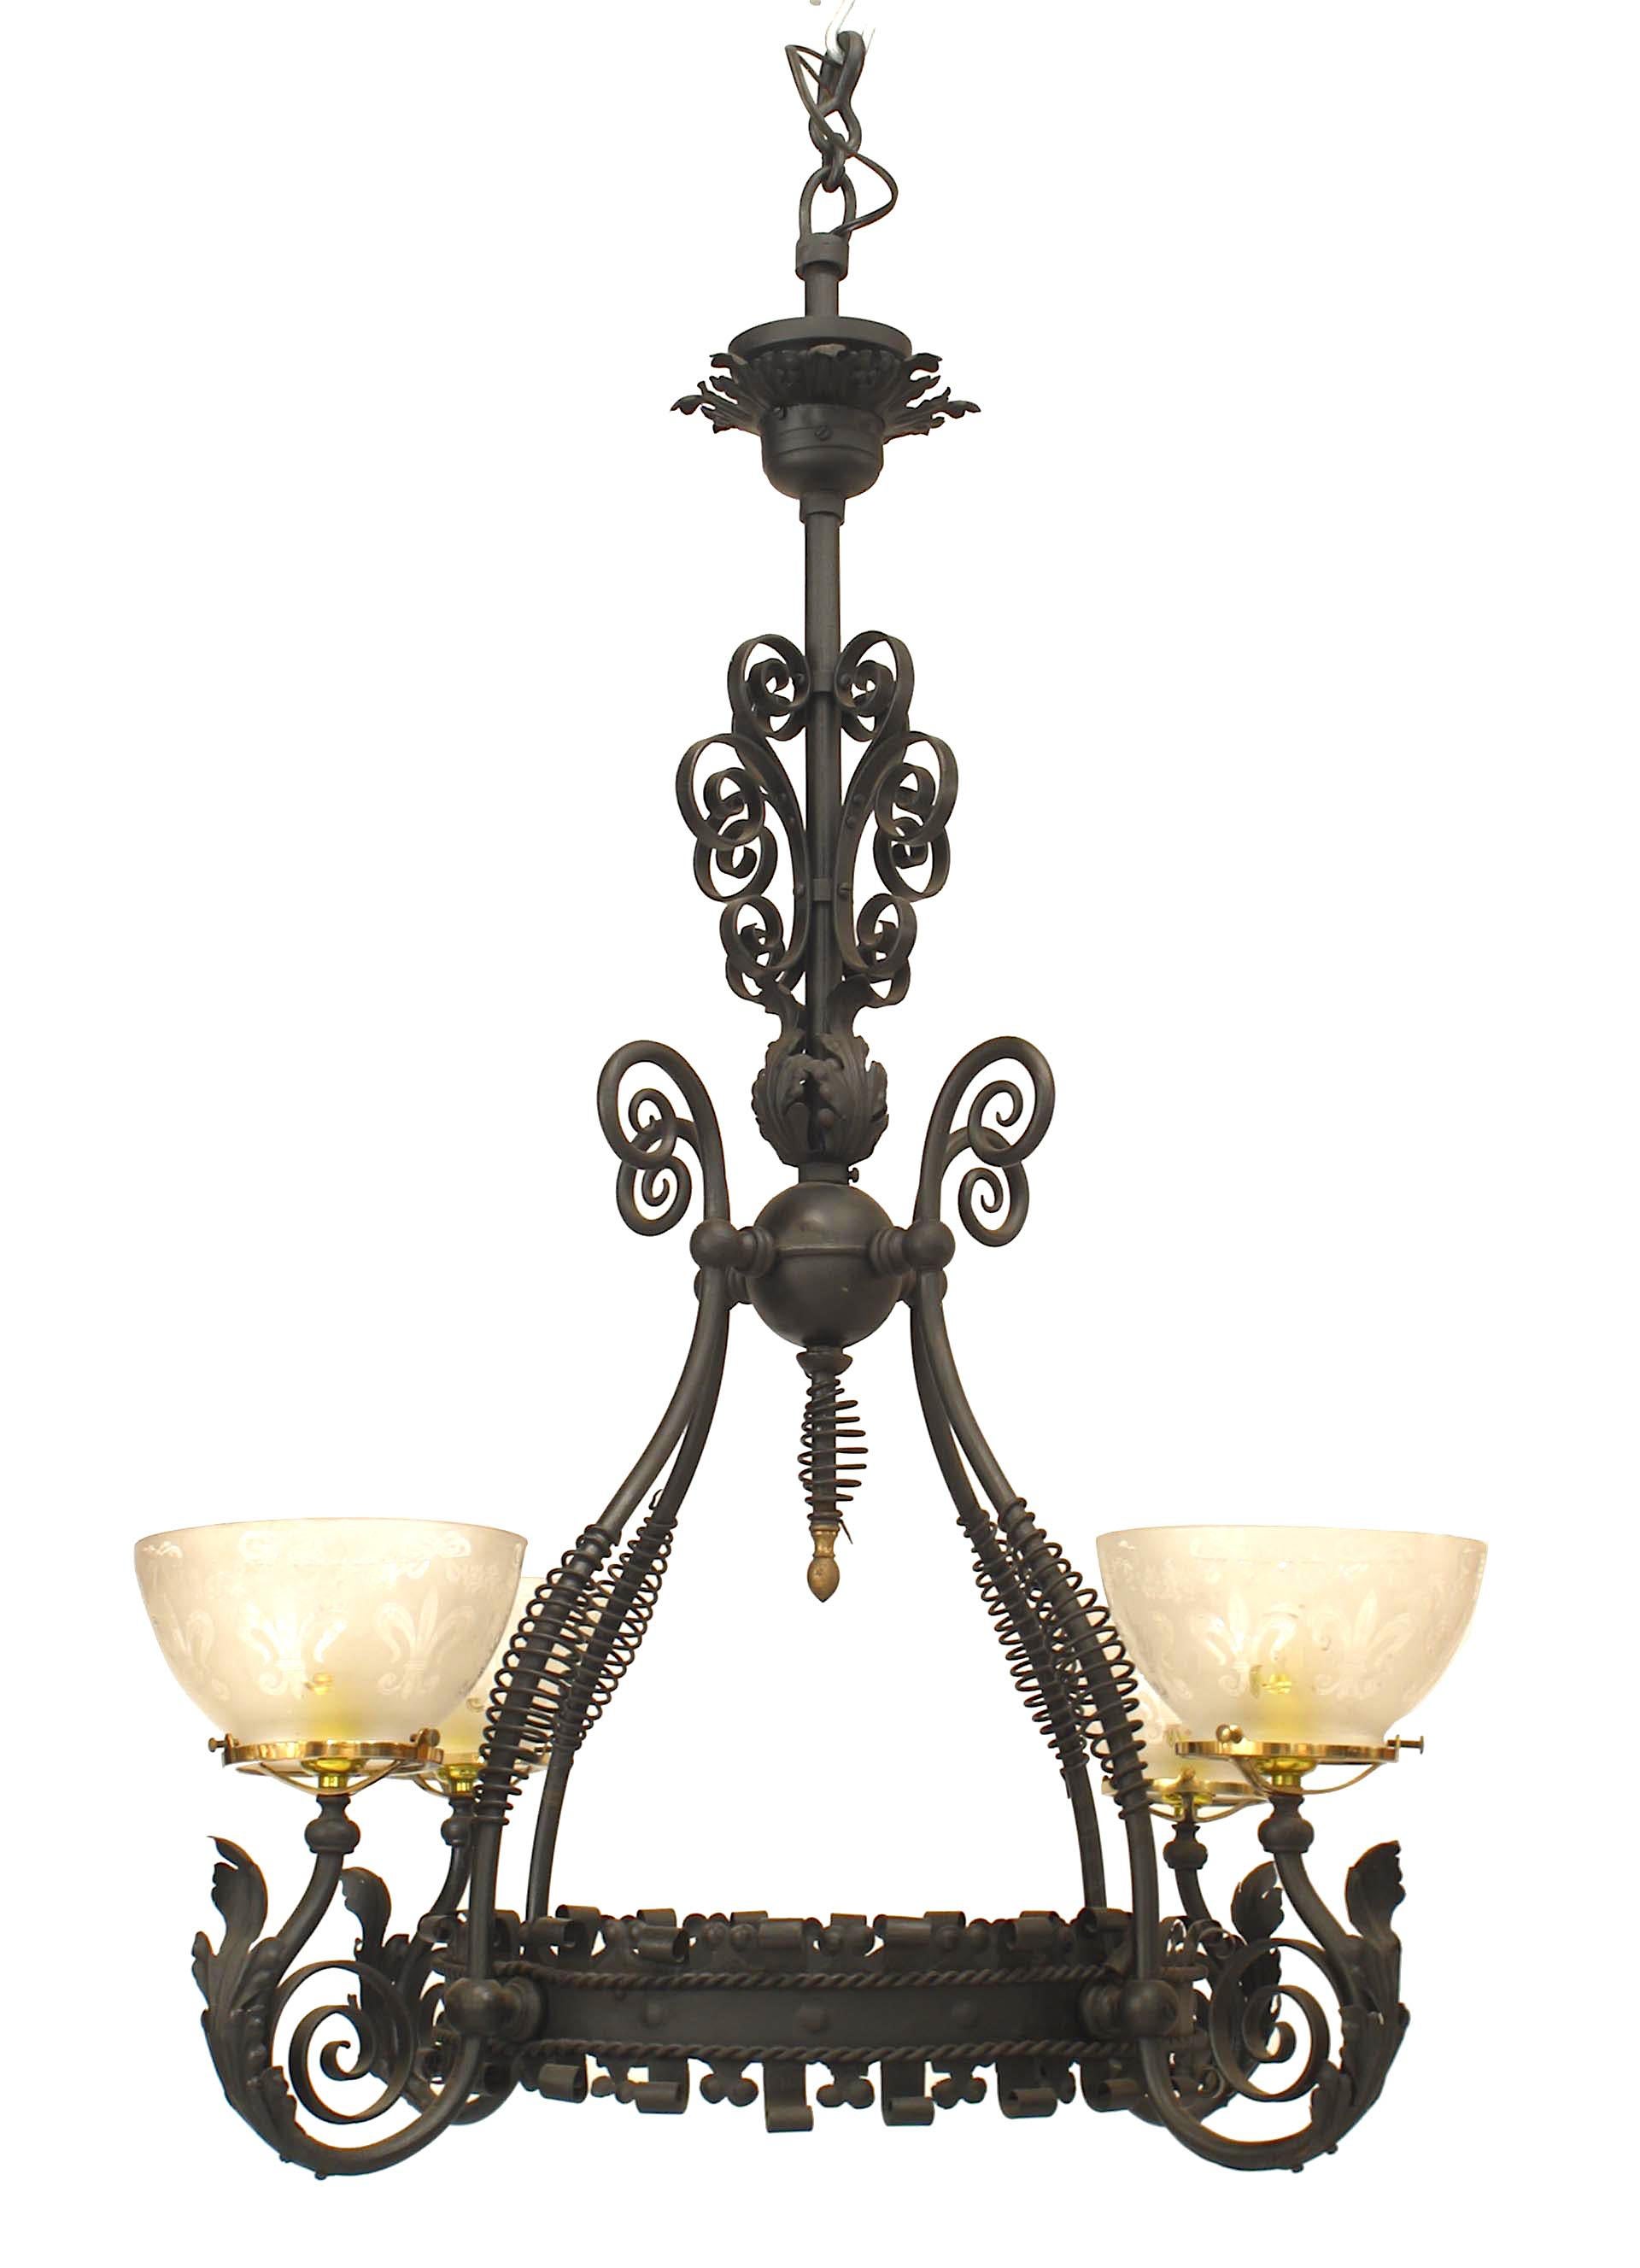 American Victorian wrought iron chandelier with 4 scroll design arms extending from a scalloped edge ring form center with etched frosted glass bowl shades.
